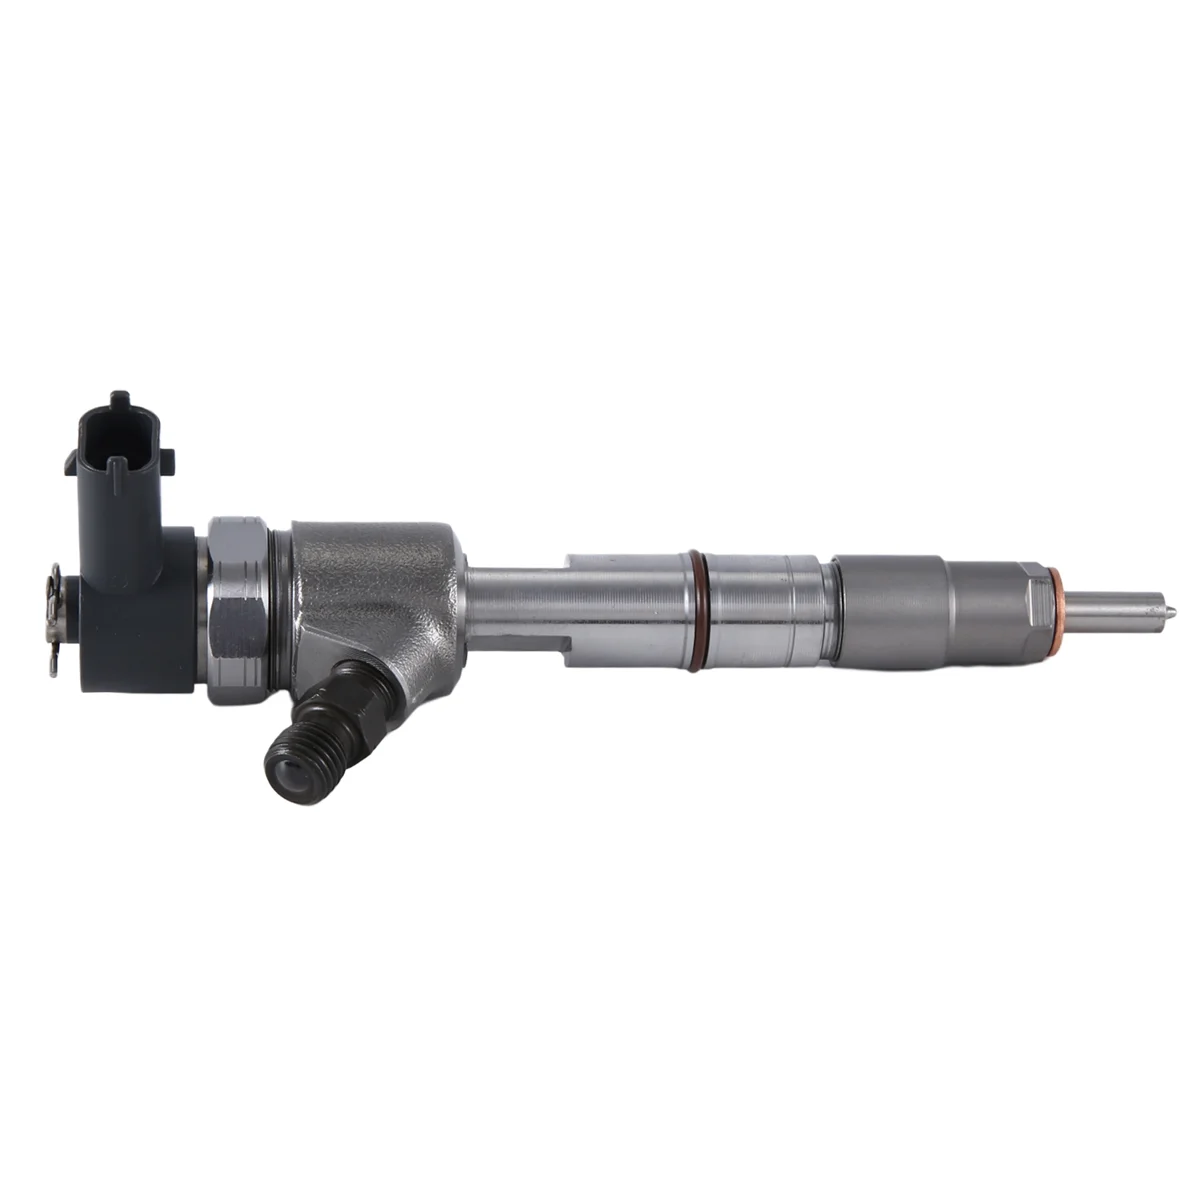 

0445110719 New Common Rail Diesel Fuel Injector Nozzle for Great Wall Wingle 5 Wingle 6 2.0L